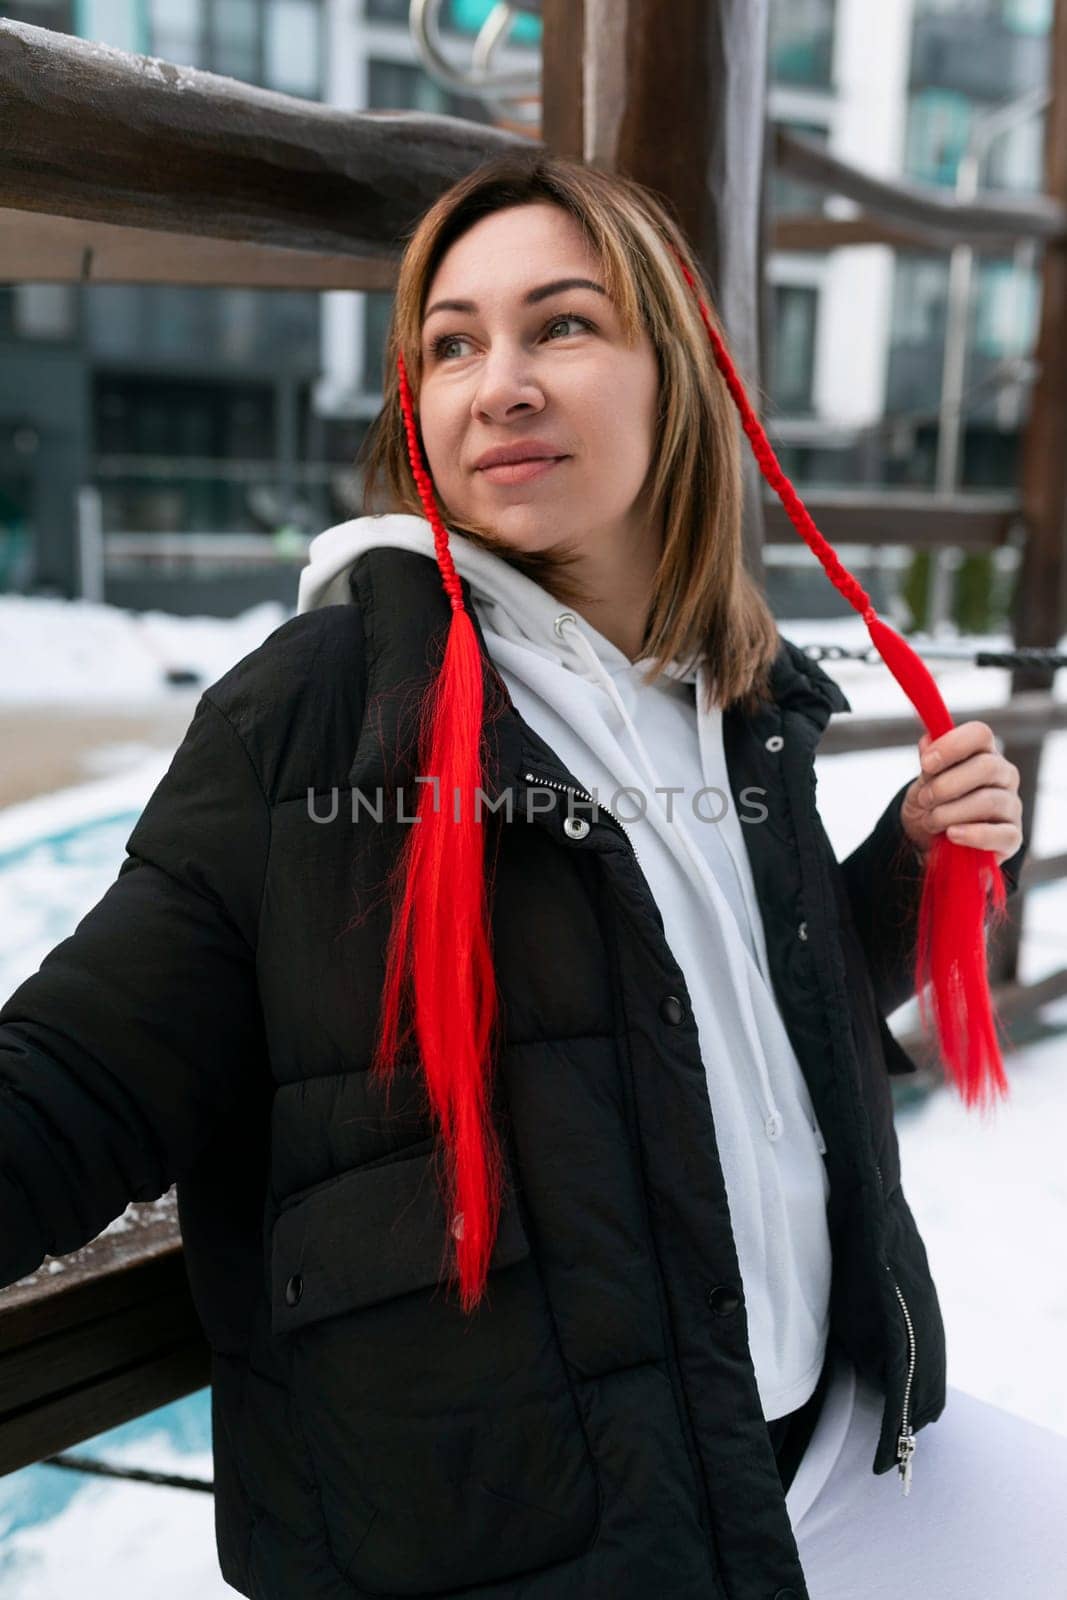 Young carefree woman spending interesting time outdoors in winter.